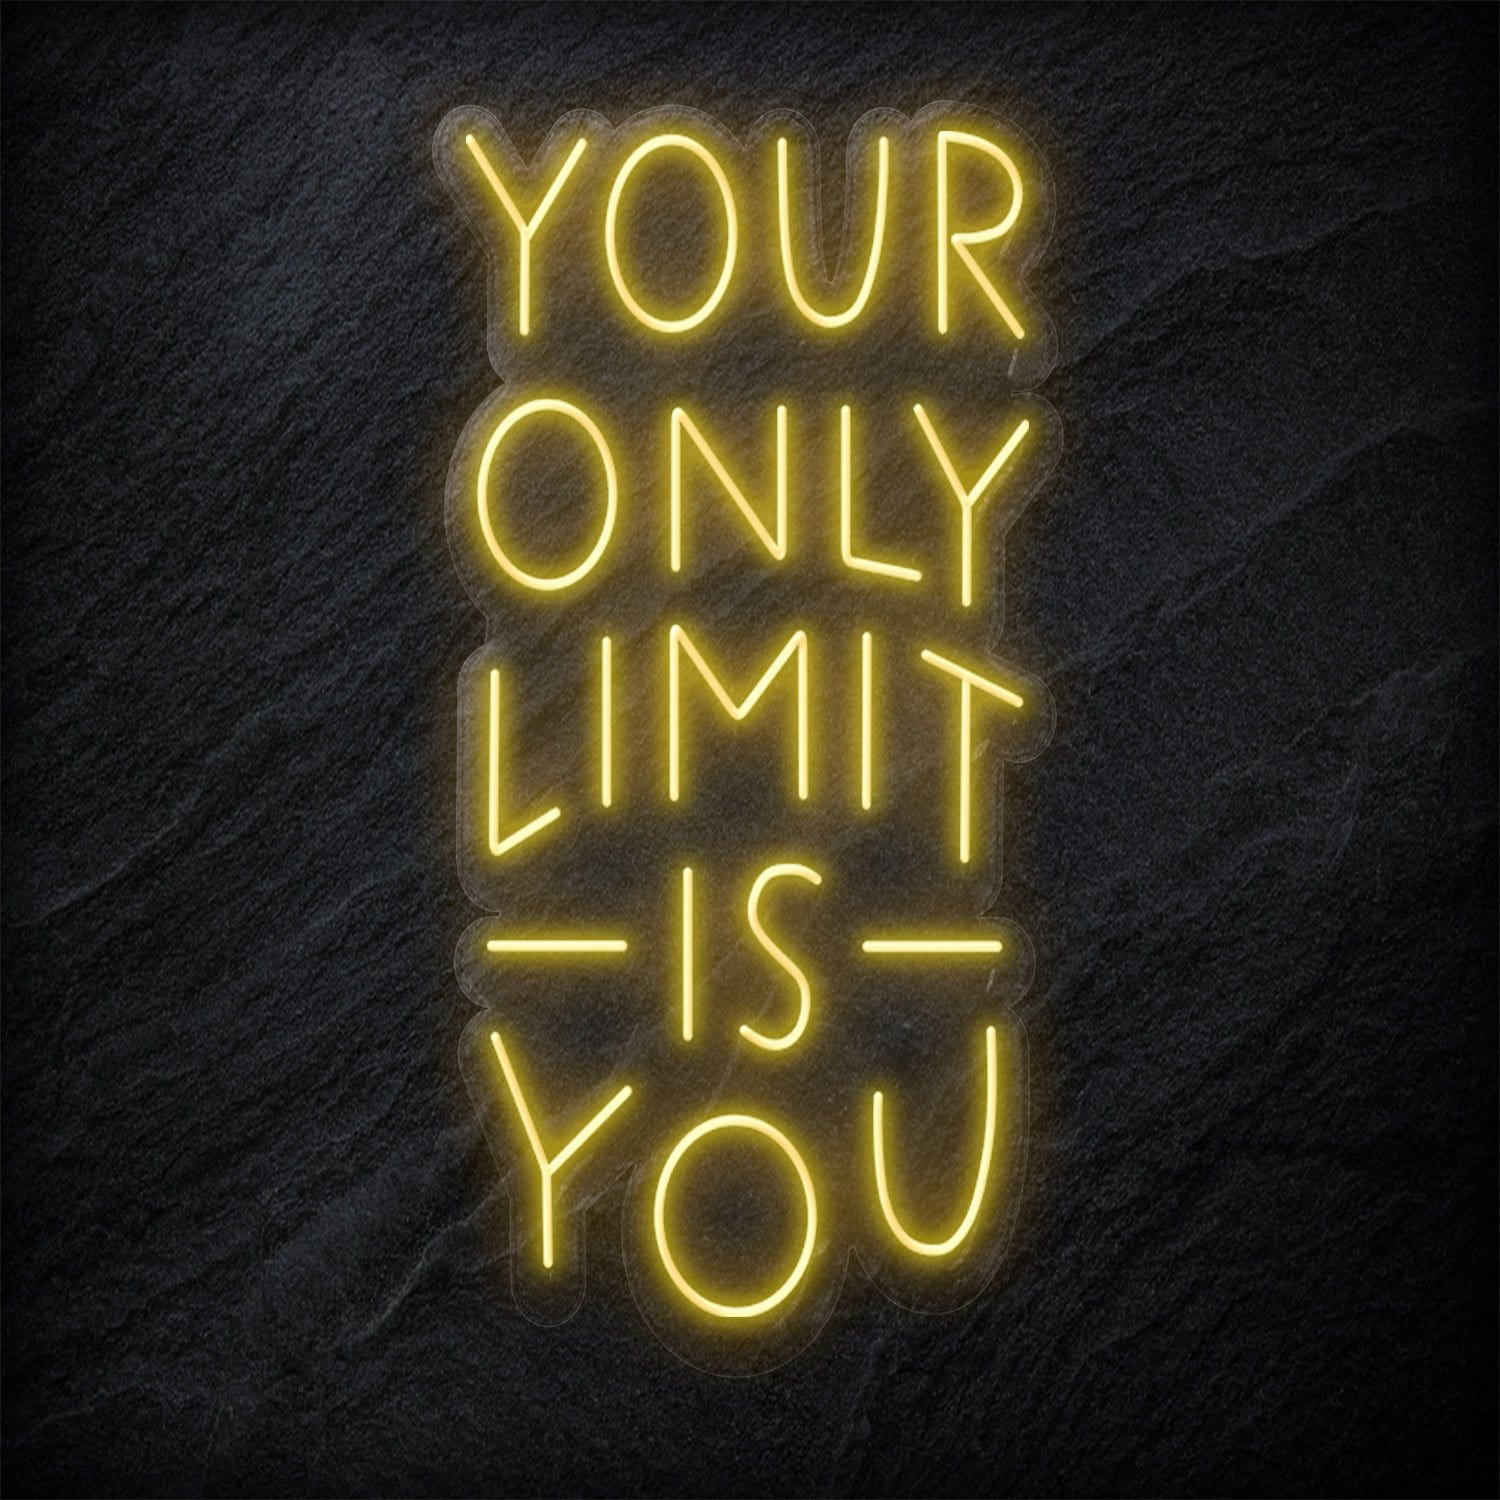 "Your Only Limit Is You" LED Neonschild Sign - NEONEVERGLOW